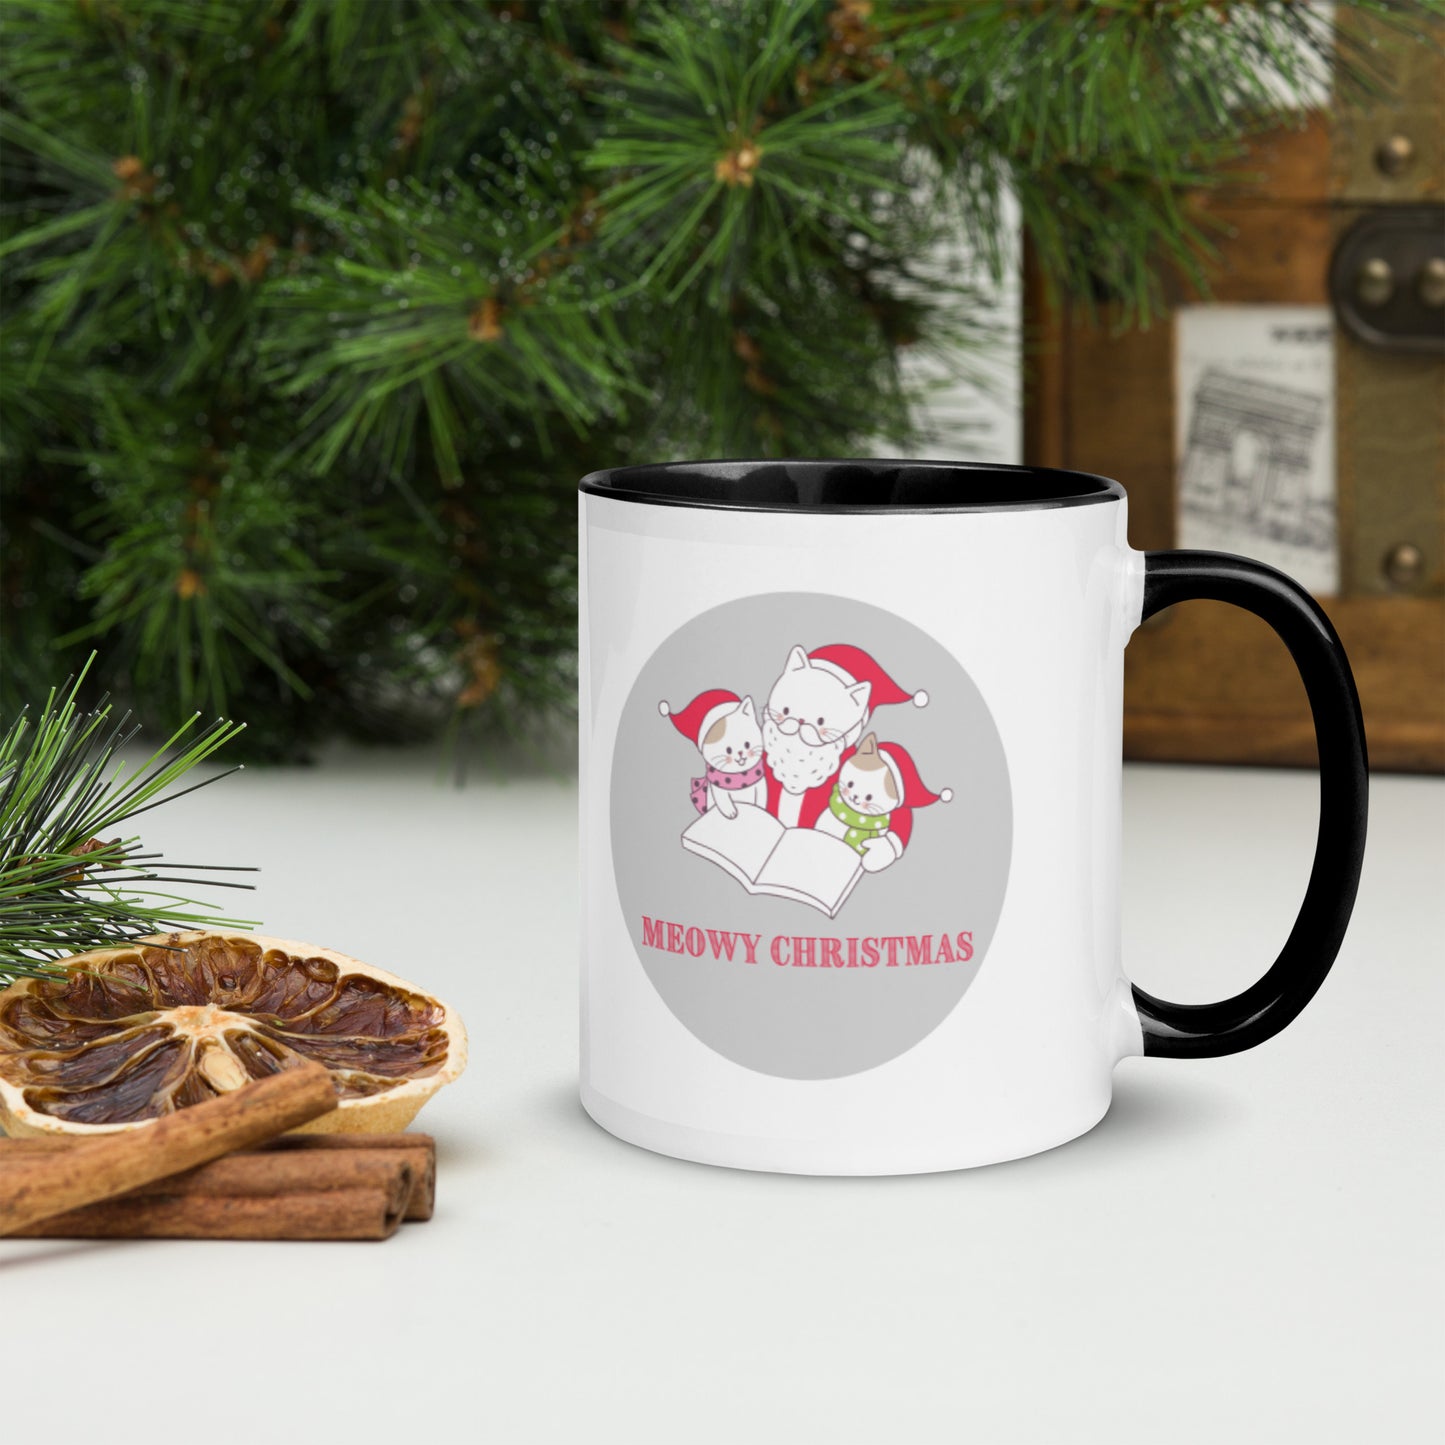 Meowy Christmas Mug with Color Inside-11oz. - The Spinster Librarian Shop